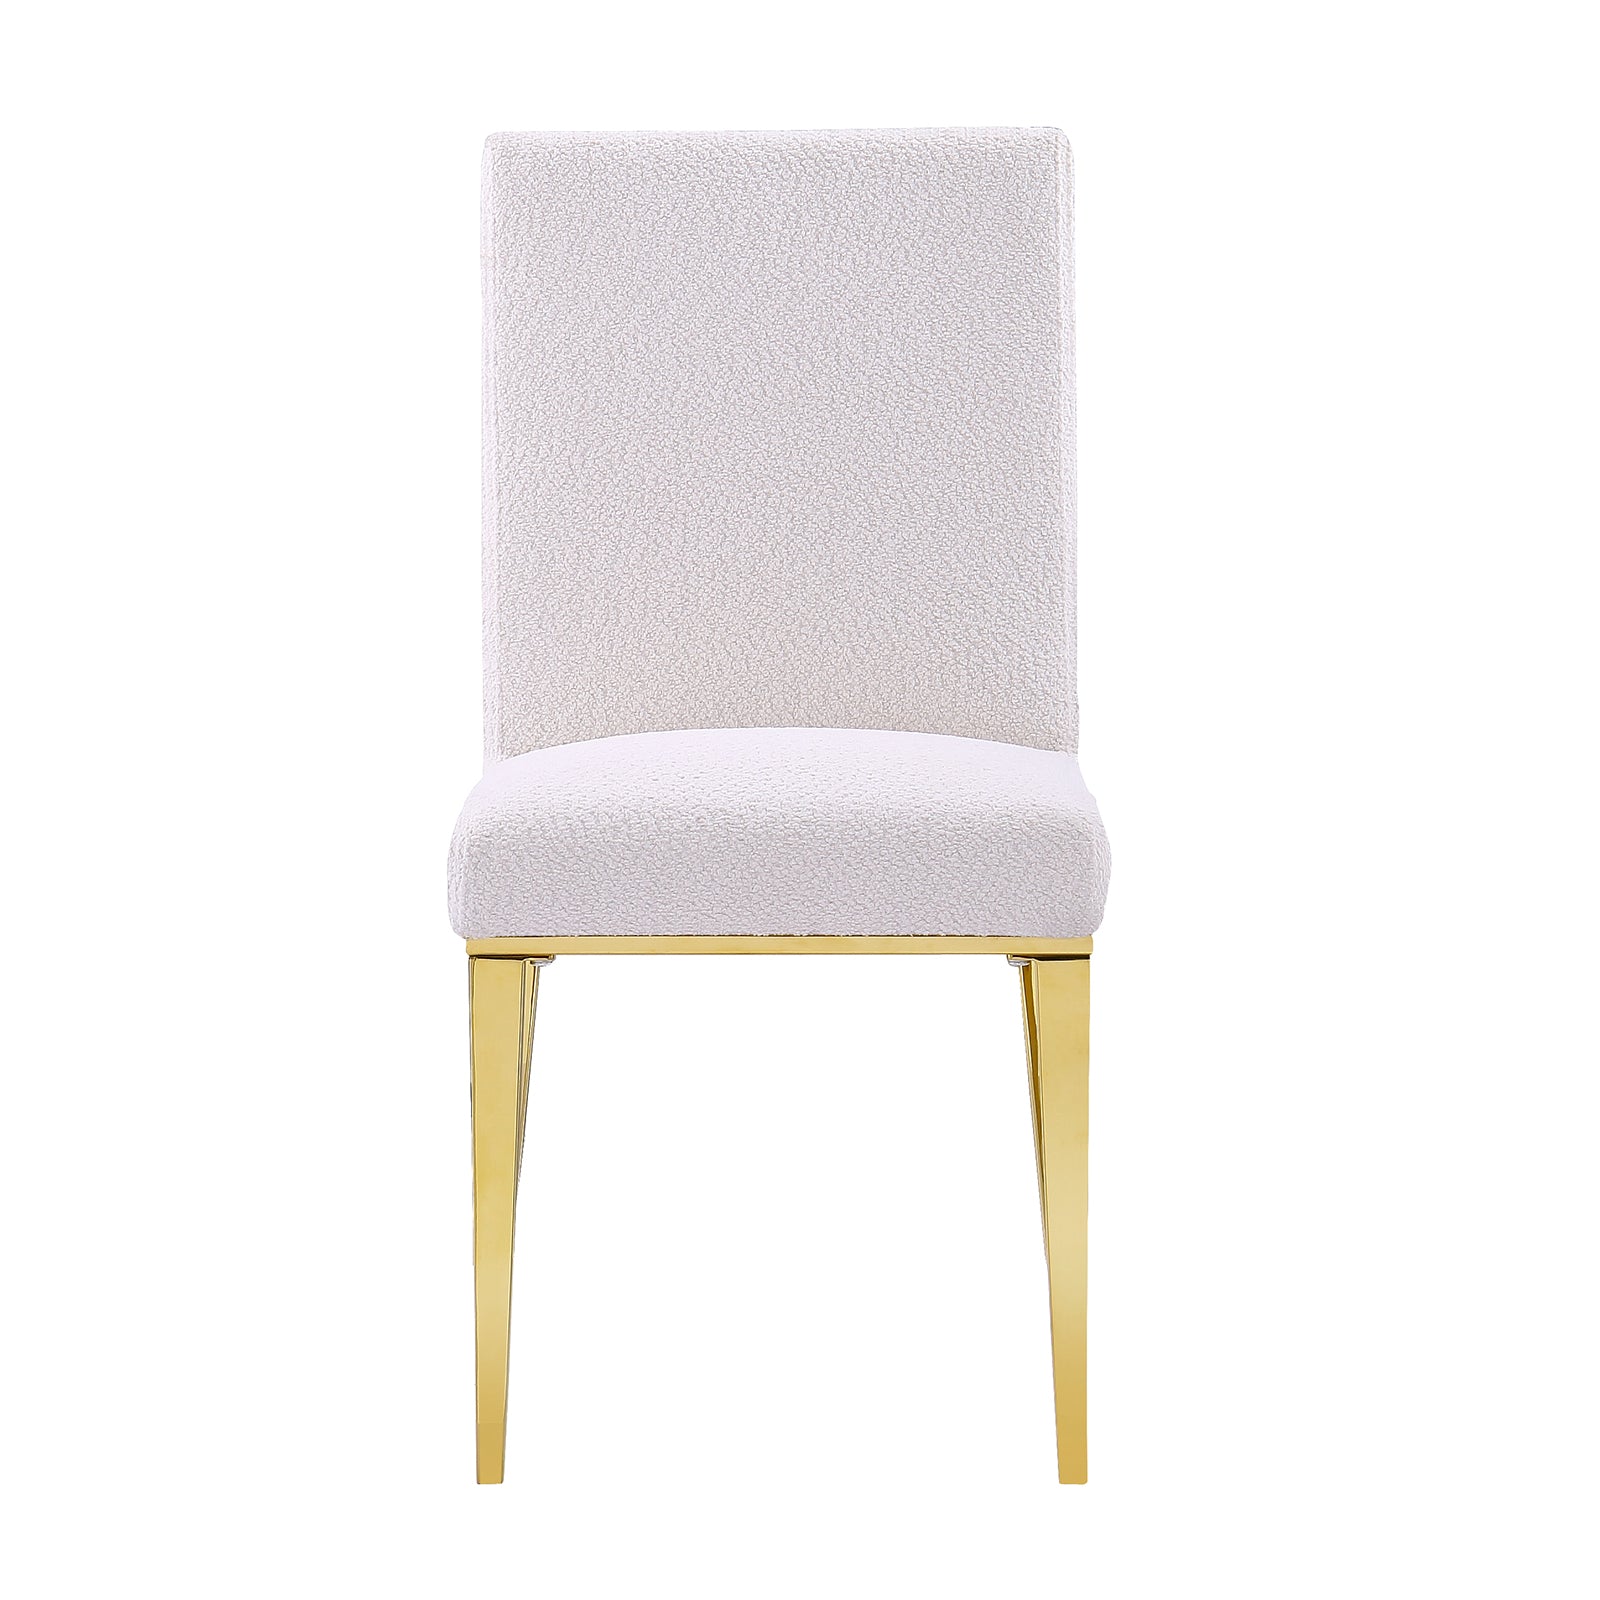 689 Set | AUZ White and Gold Dining room Sets for 6